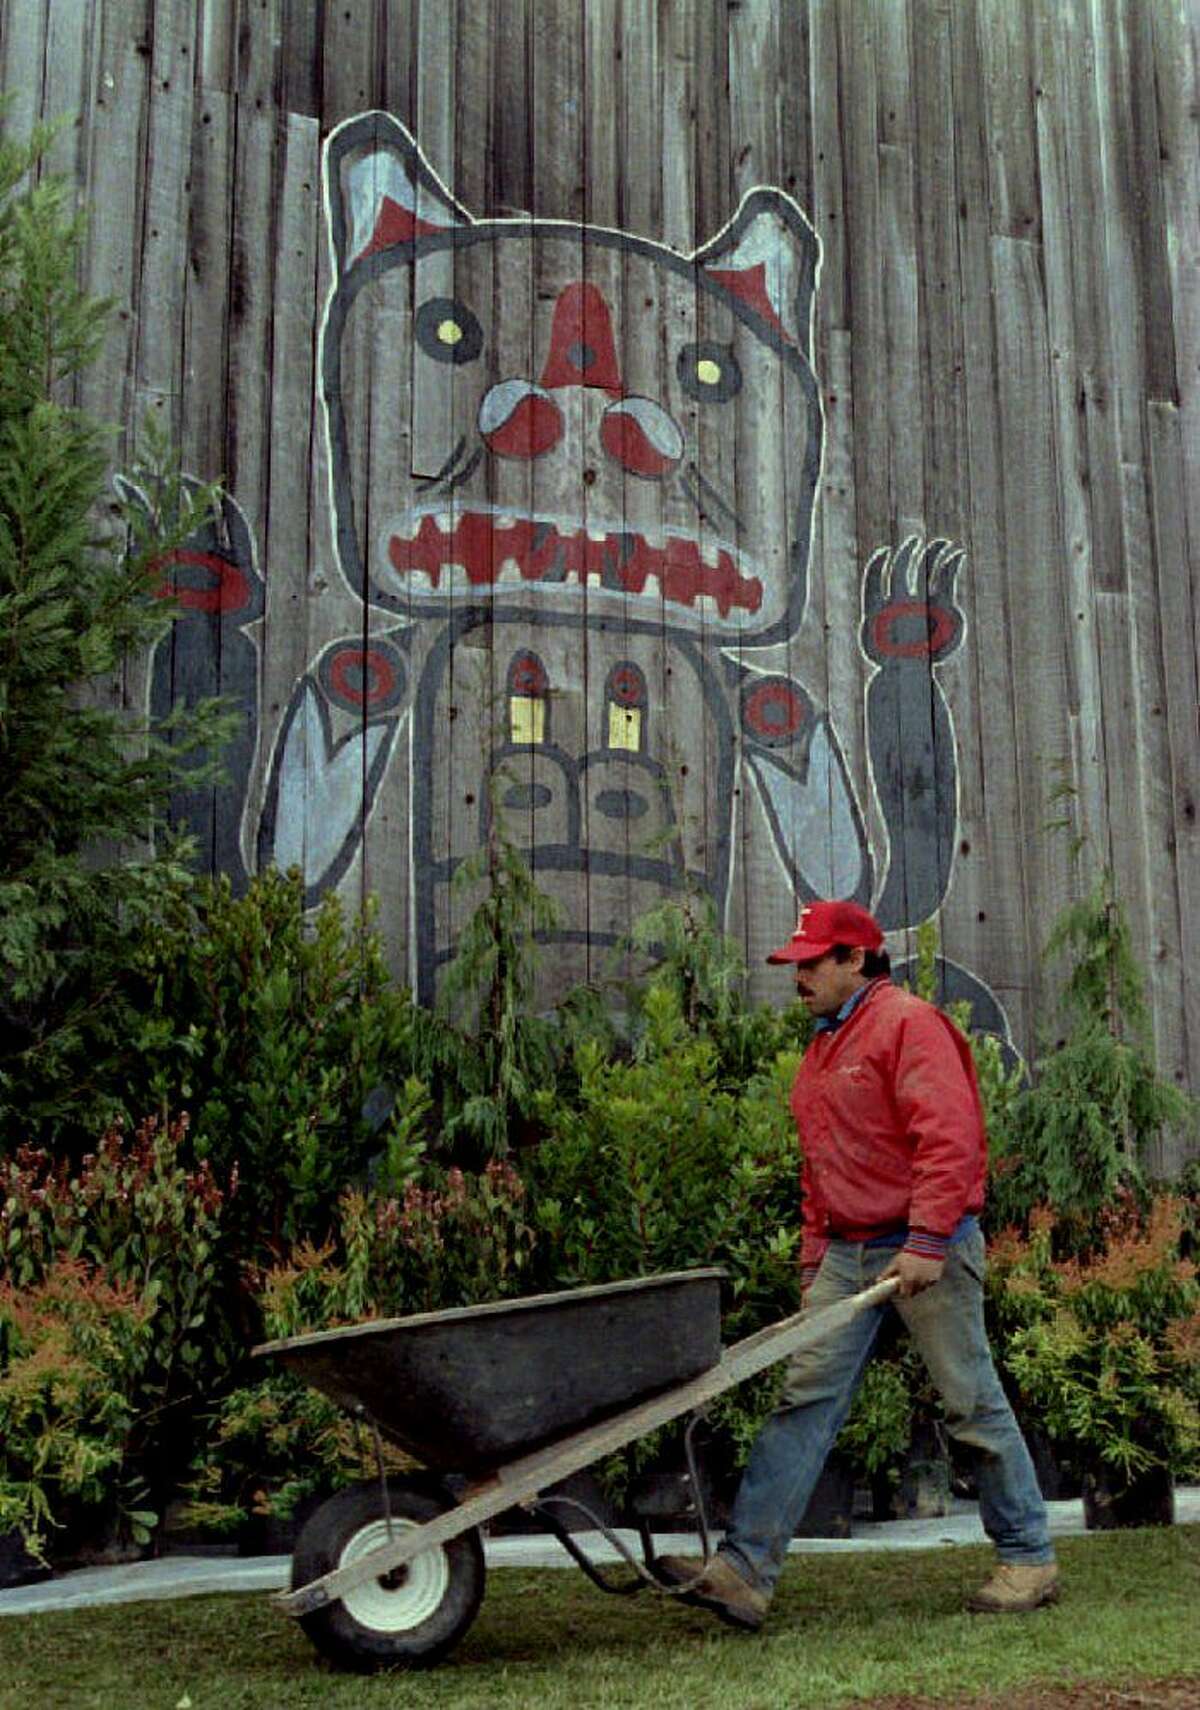 SEATTLE, UNITED STATES: A gardner puts plants in front of an Indian painting at Tillicum Village on Blake Island 19 November 1993. (Photo credit TIM CLARY/AFP via Getty Images)